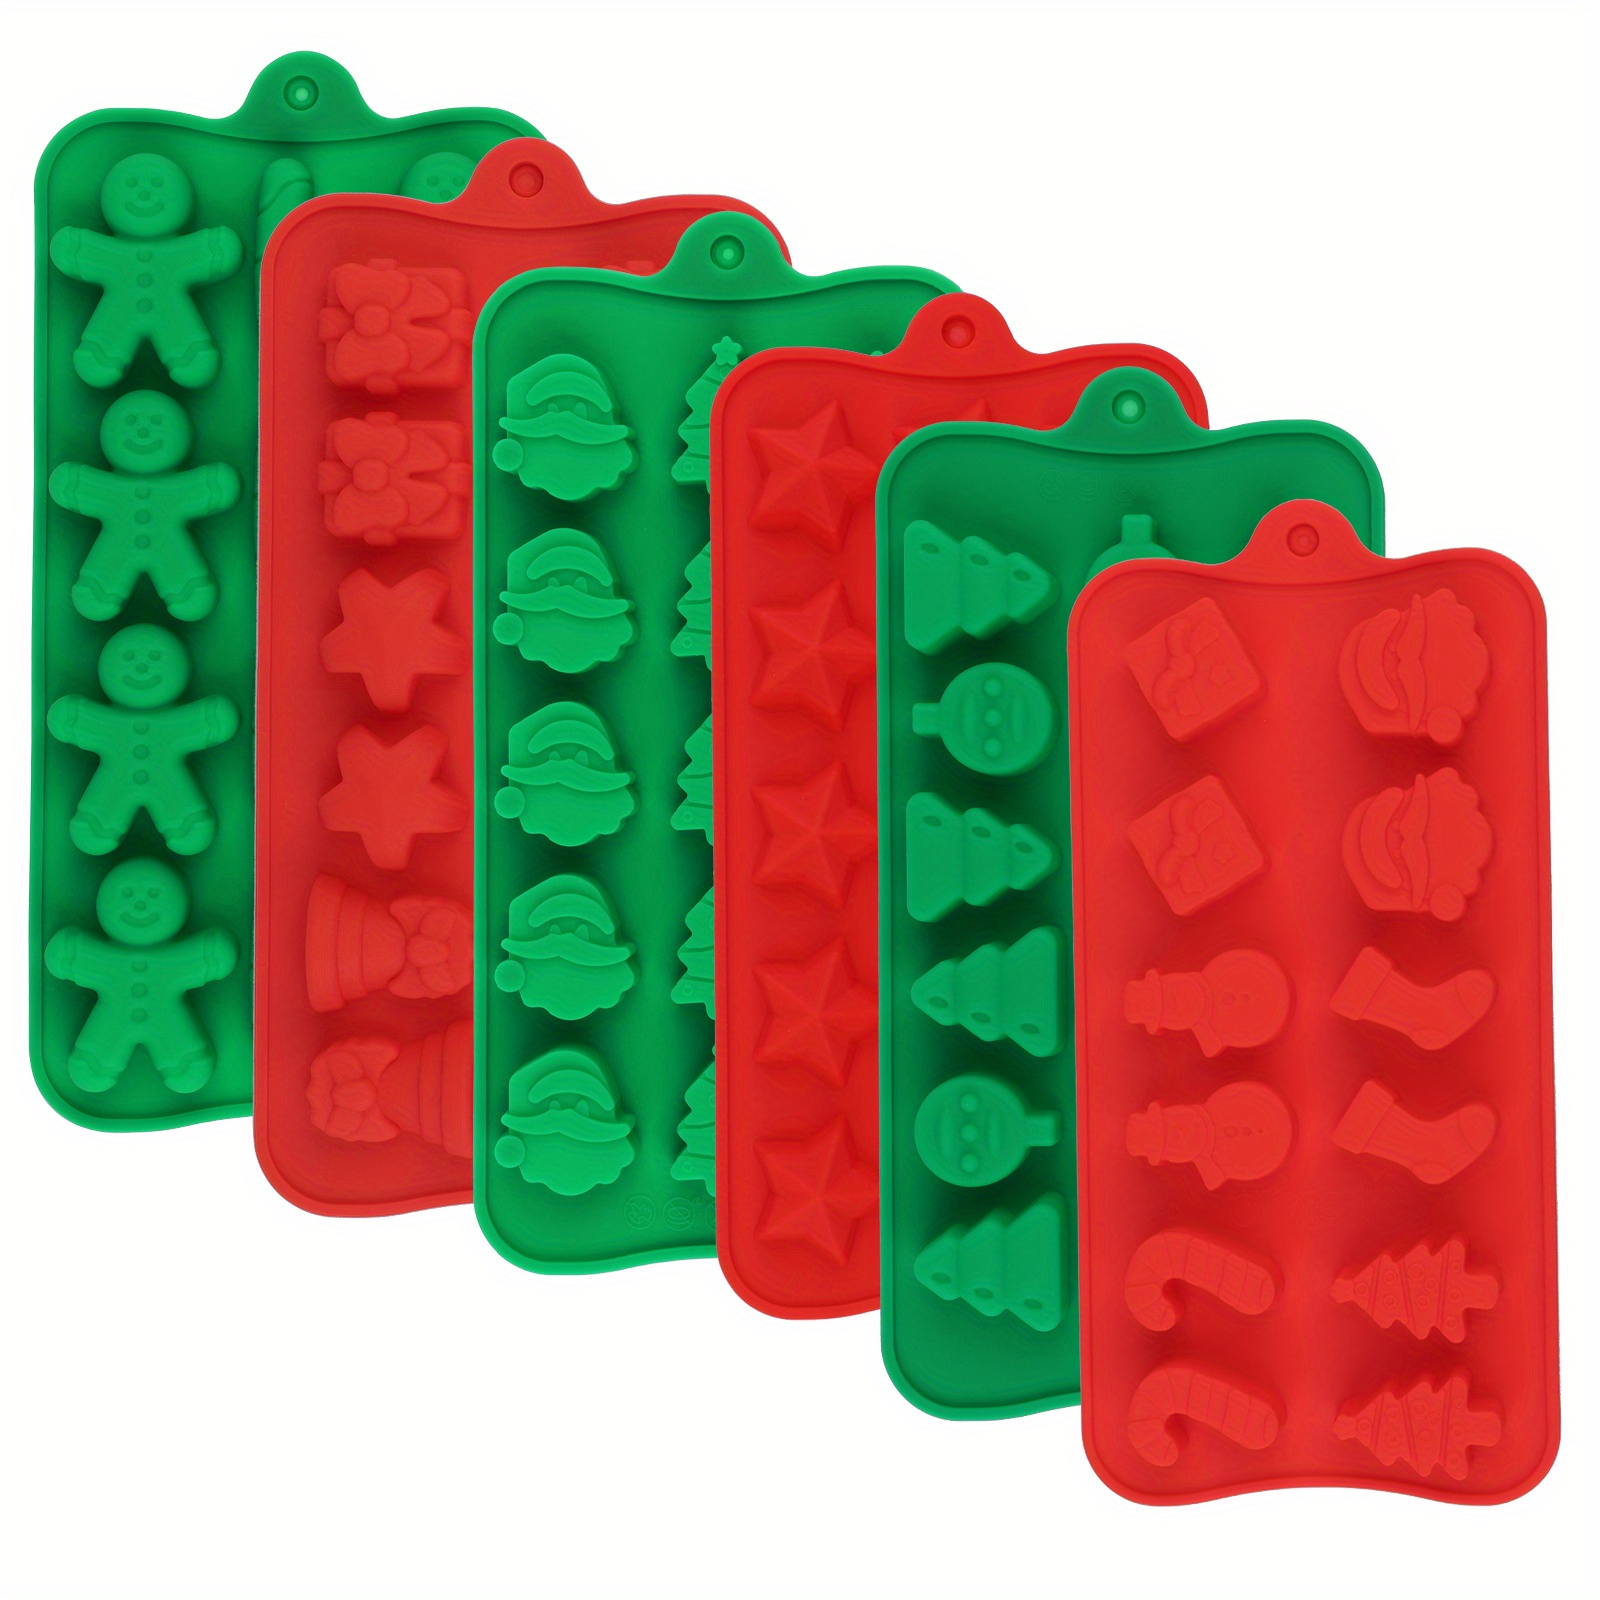 Holiday Theme Ice Cube Tray Candy Cane Gingerbread Men Christmas Party  Novelty Silicone Jello Chocolate Mold 